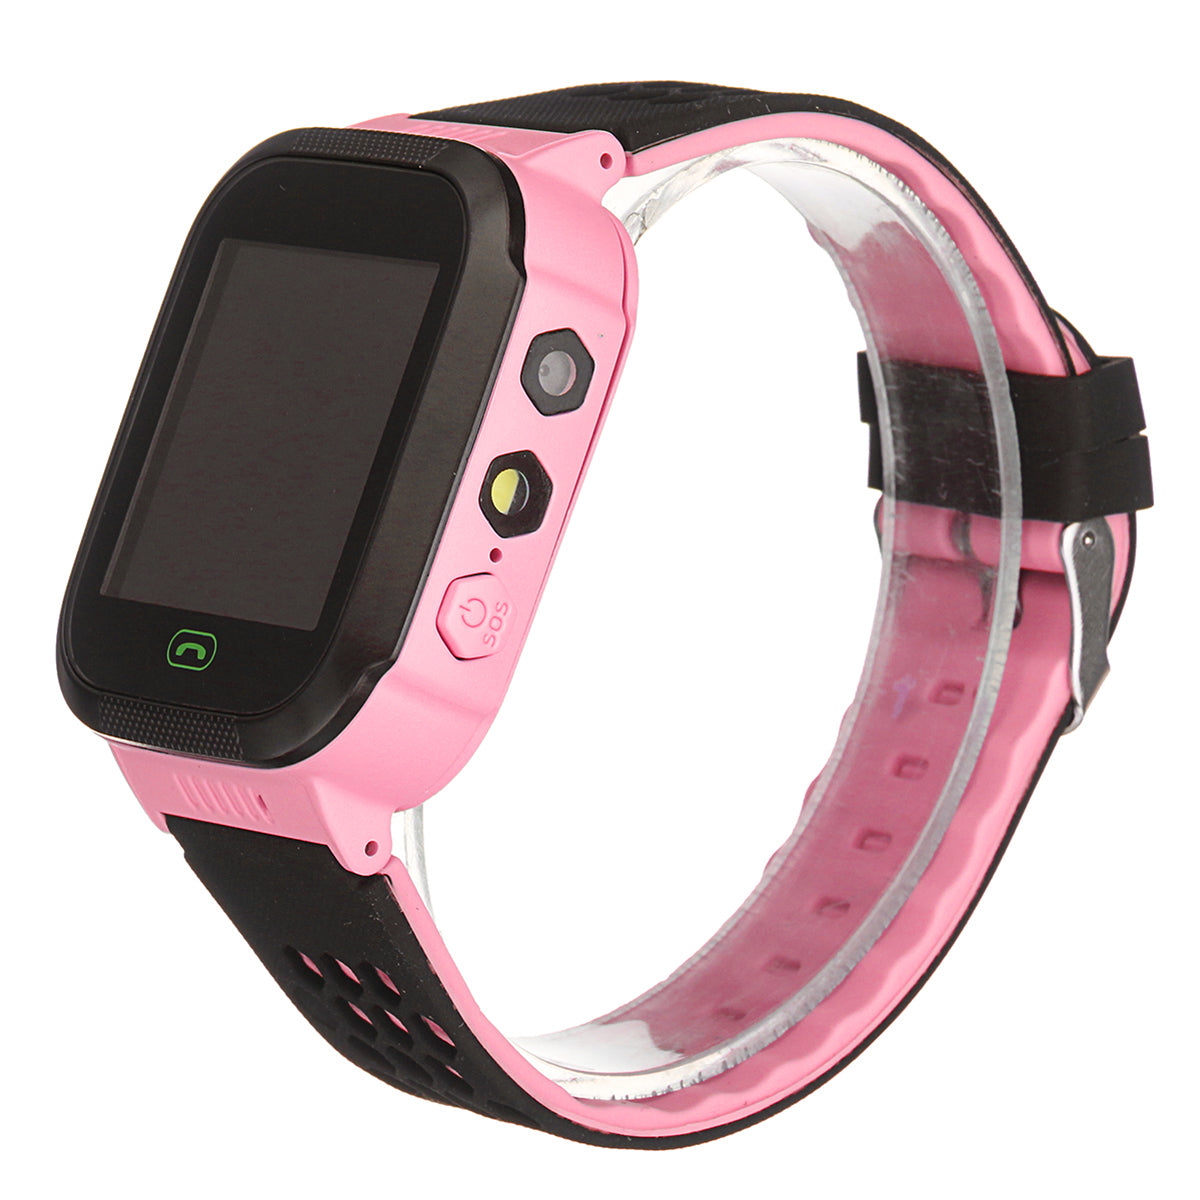 Bakeey Waterproof Tracker SOS Call Children Smart Watch For Android IOS